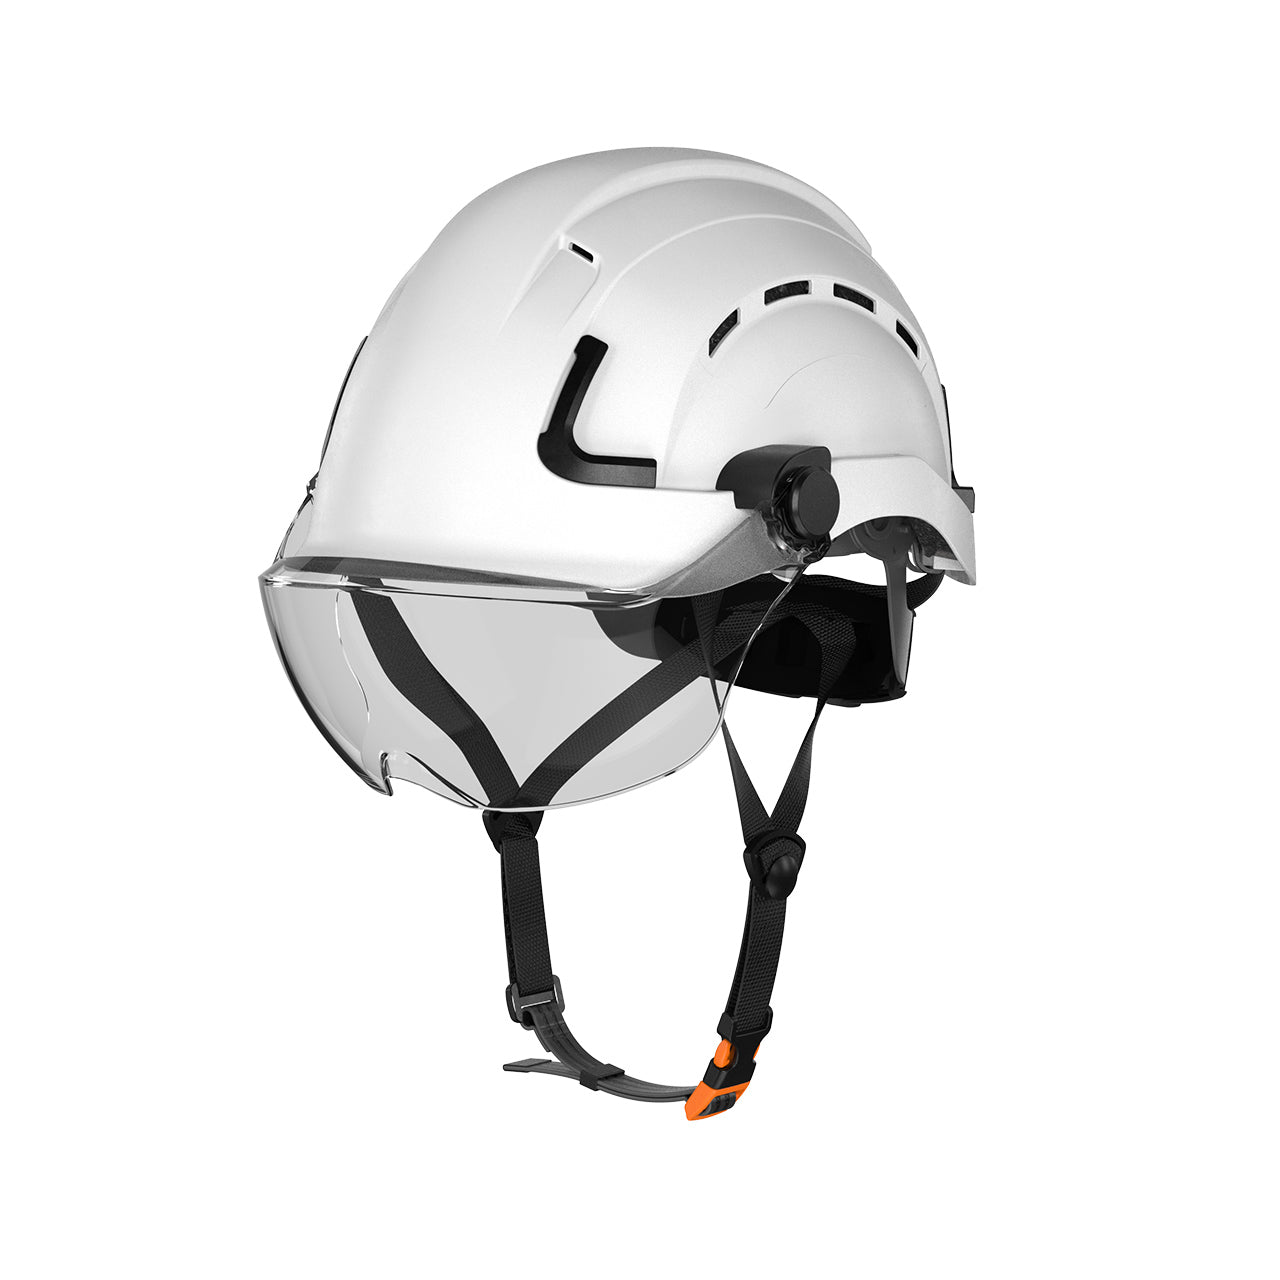 H2-CH Safety Helmet w/ clear visor Type 2 Class C, ANSI Z89 and EN12492 rated - Defender Safety